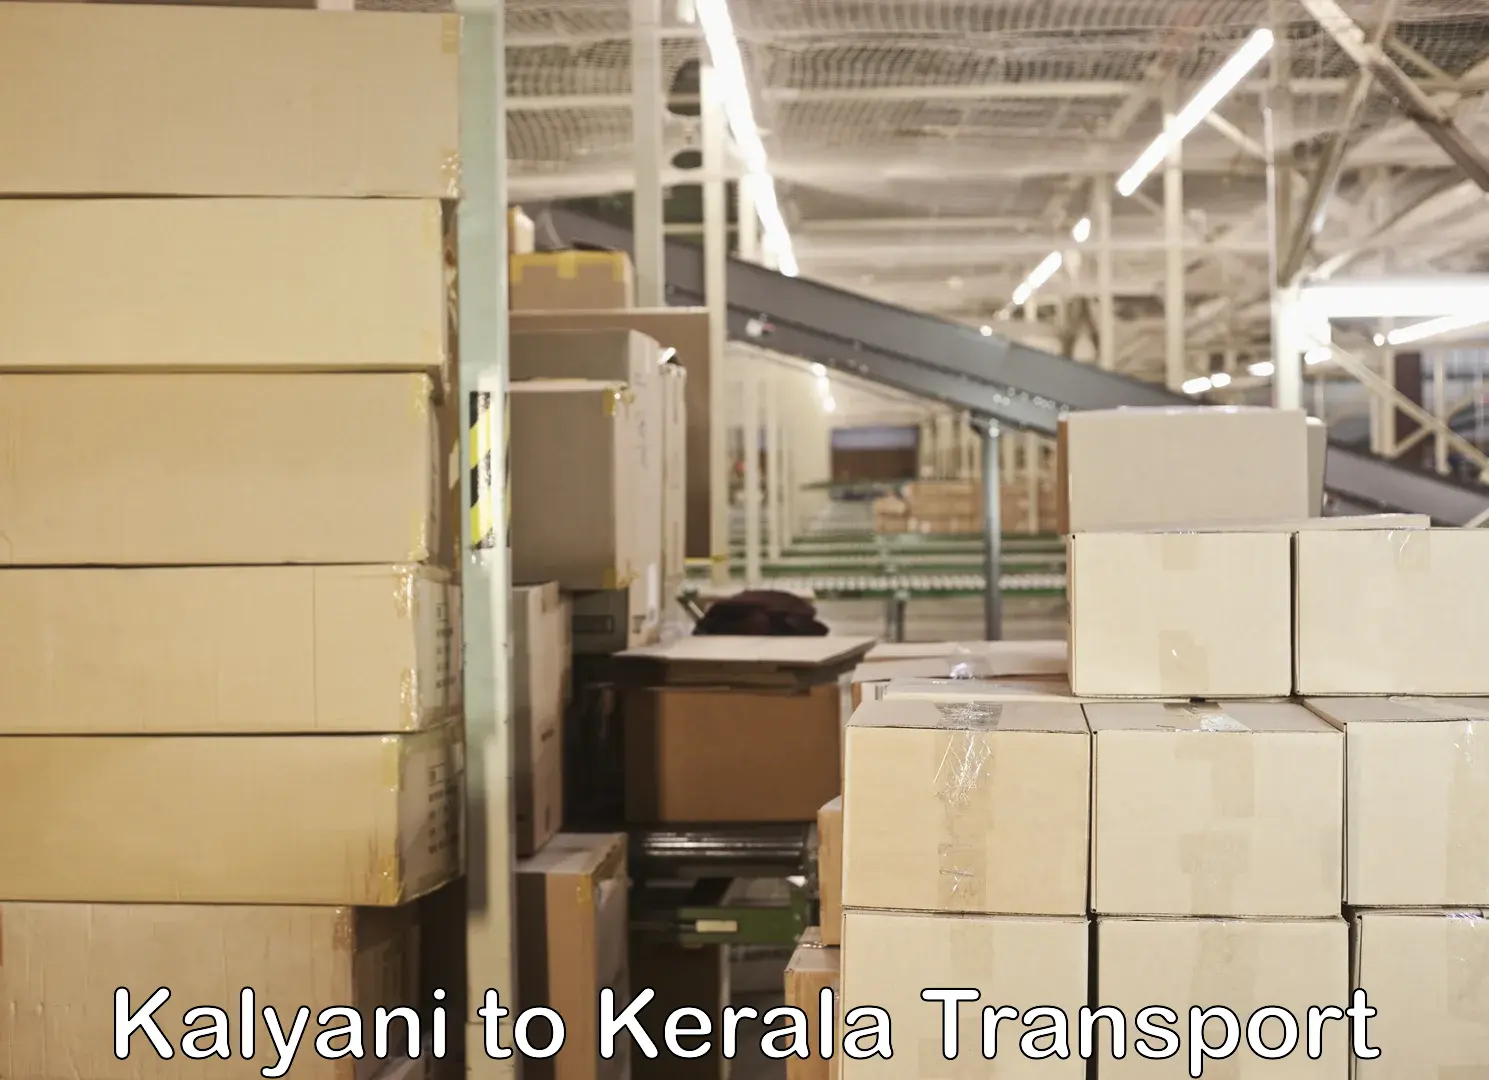 Transport bike from one state to another Kalyani to Kottayam